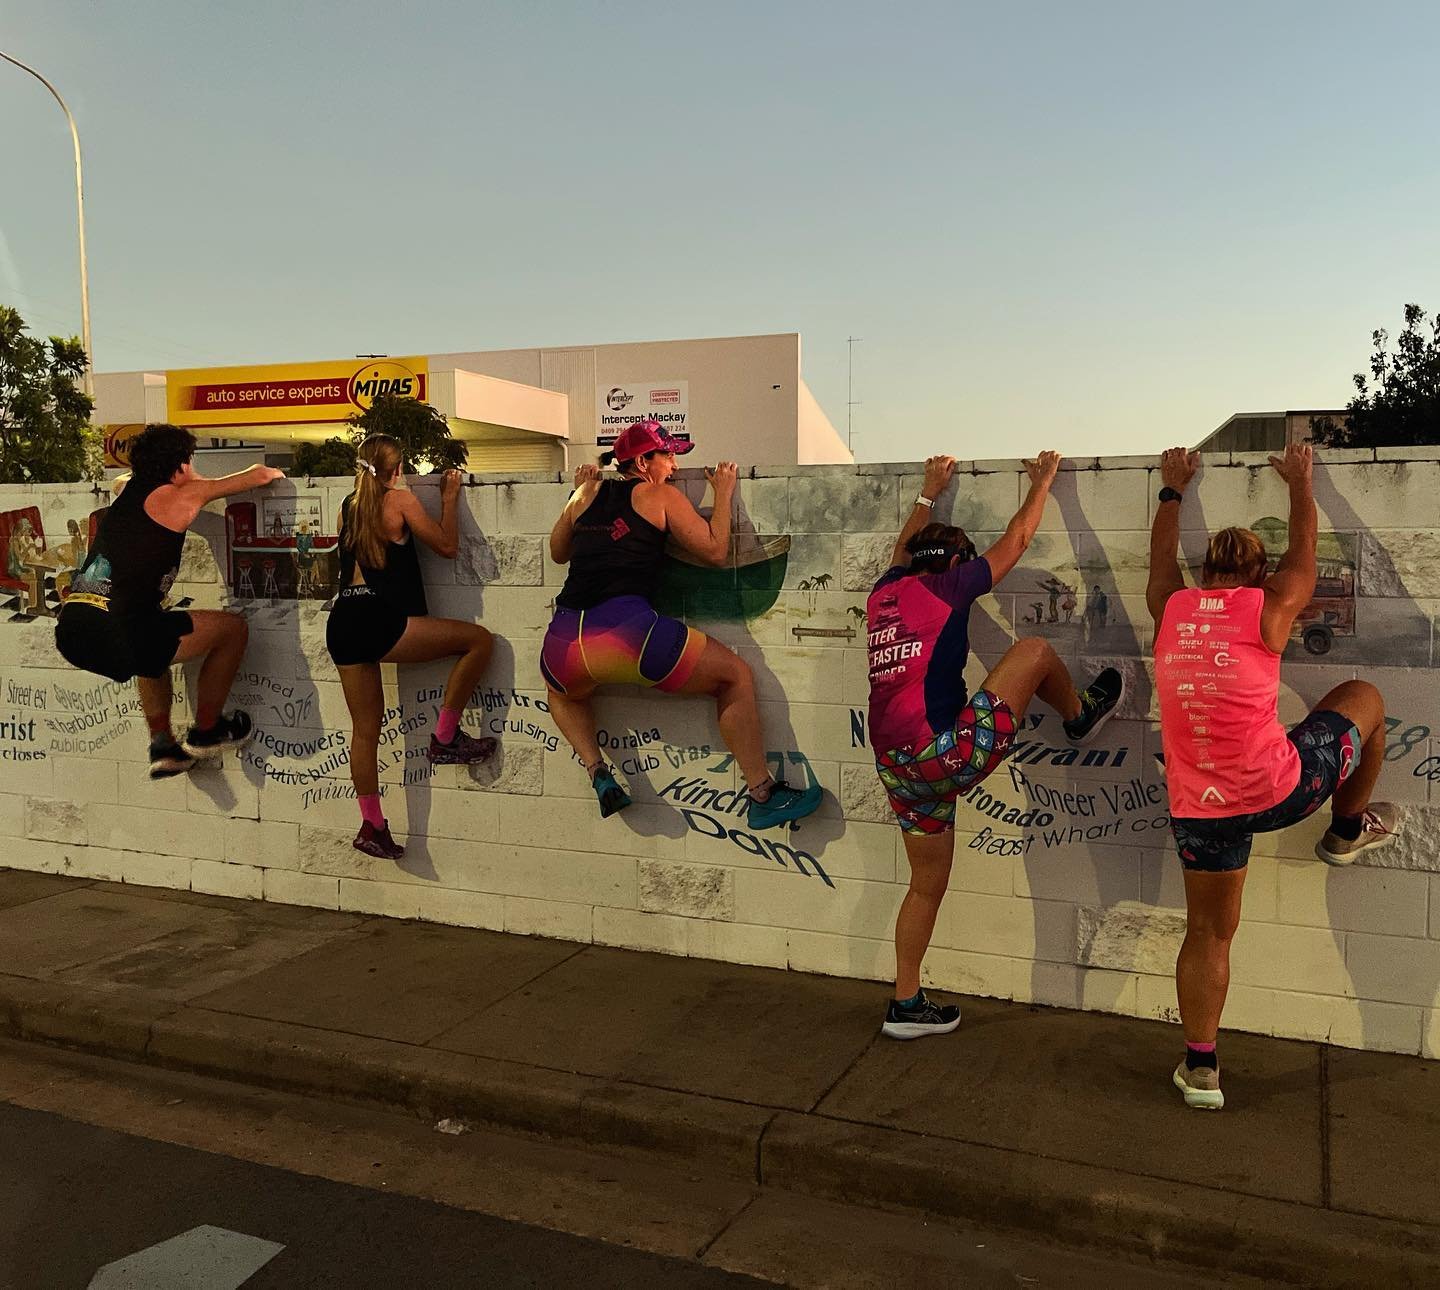 You&rsquo;ve heard of the Great Wall of China&hellip;⁣
⁣
But⁣
⁣
Have you heard of the Great Wall of Mackay?⁣
⁣
They tried to escape but the whip was cracked and the 🏃&zwj;♀️ efforts were all completed 🔥 ⁣
⁣
#thursdaytempo #runfun #fitterfasterstron